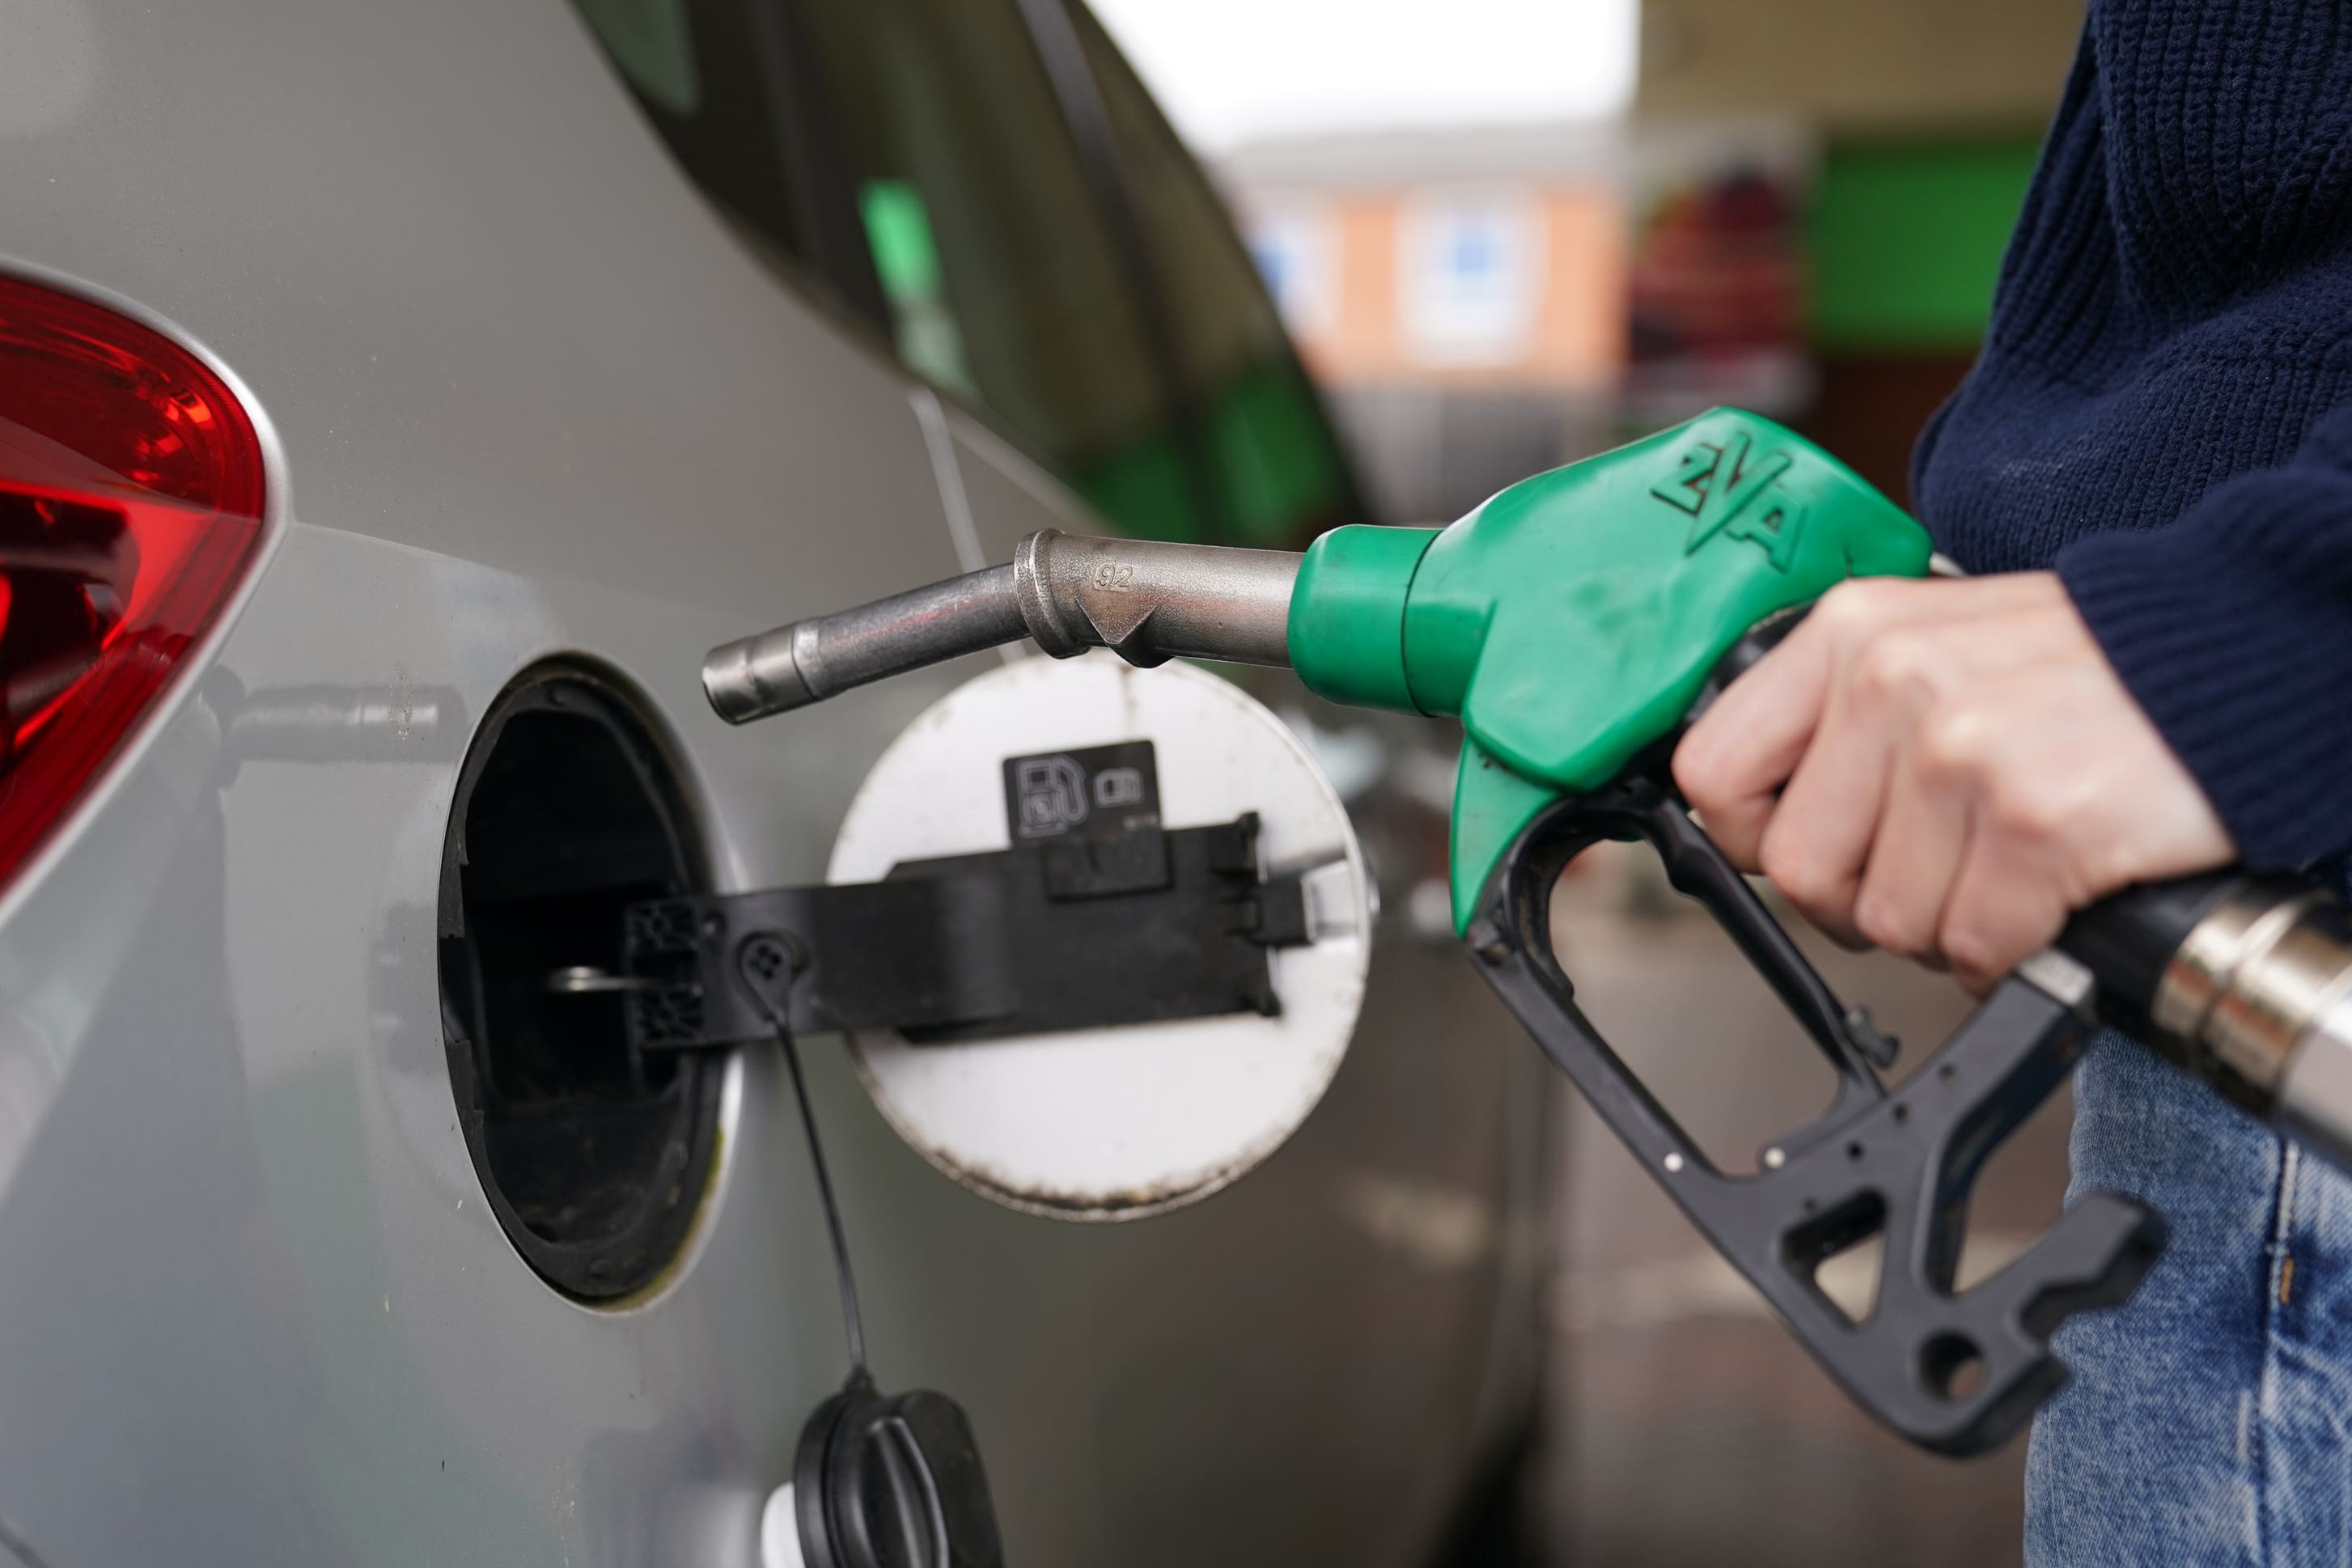 Drivers benefited from a 6p per litre fall in petrol prices last month, new figures show (Joe Giddens/PA)